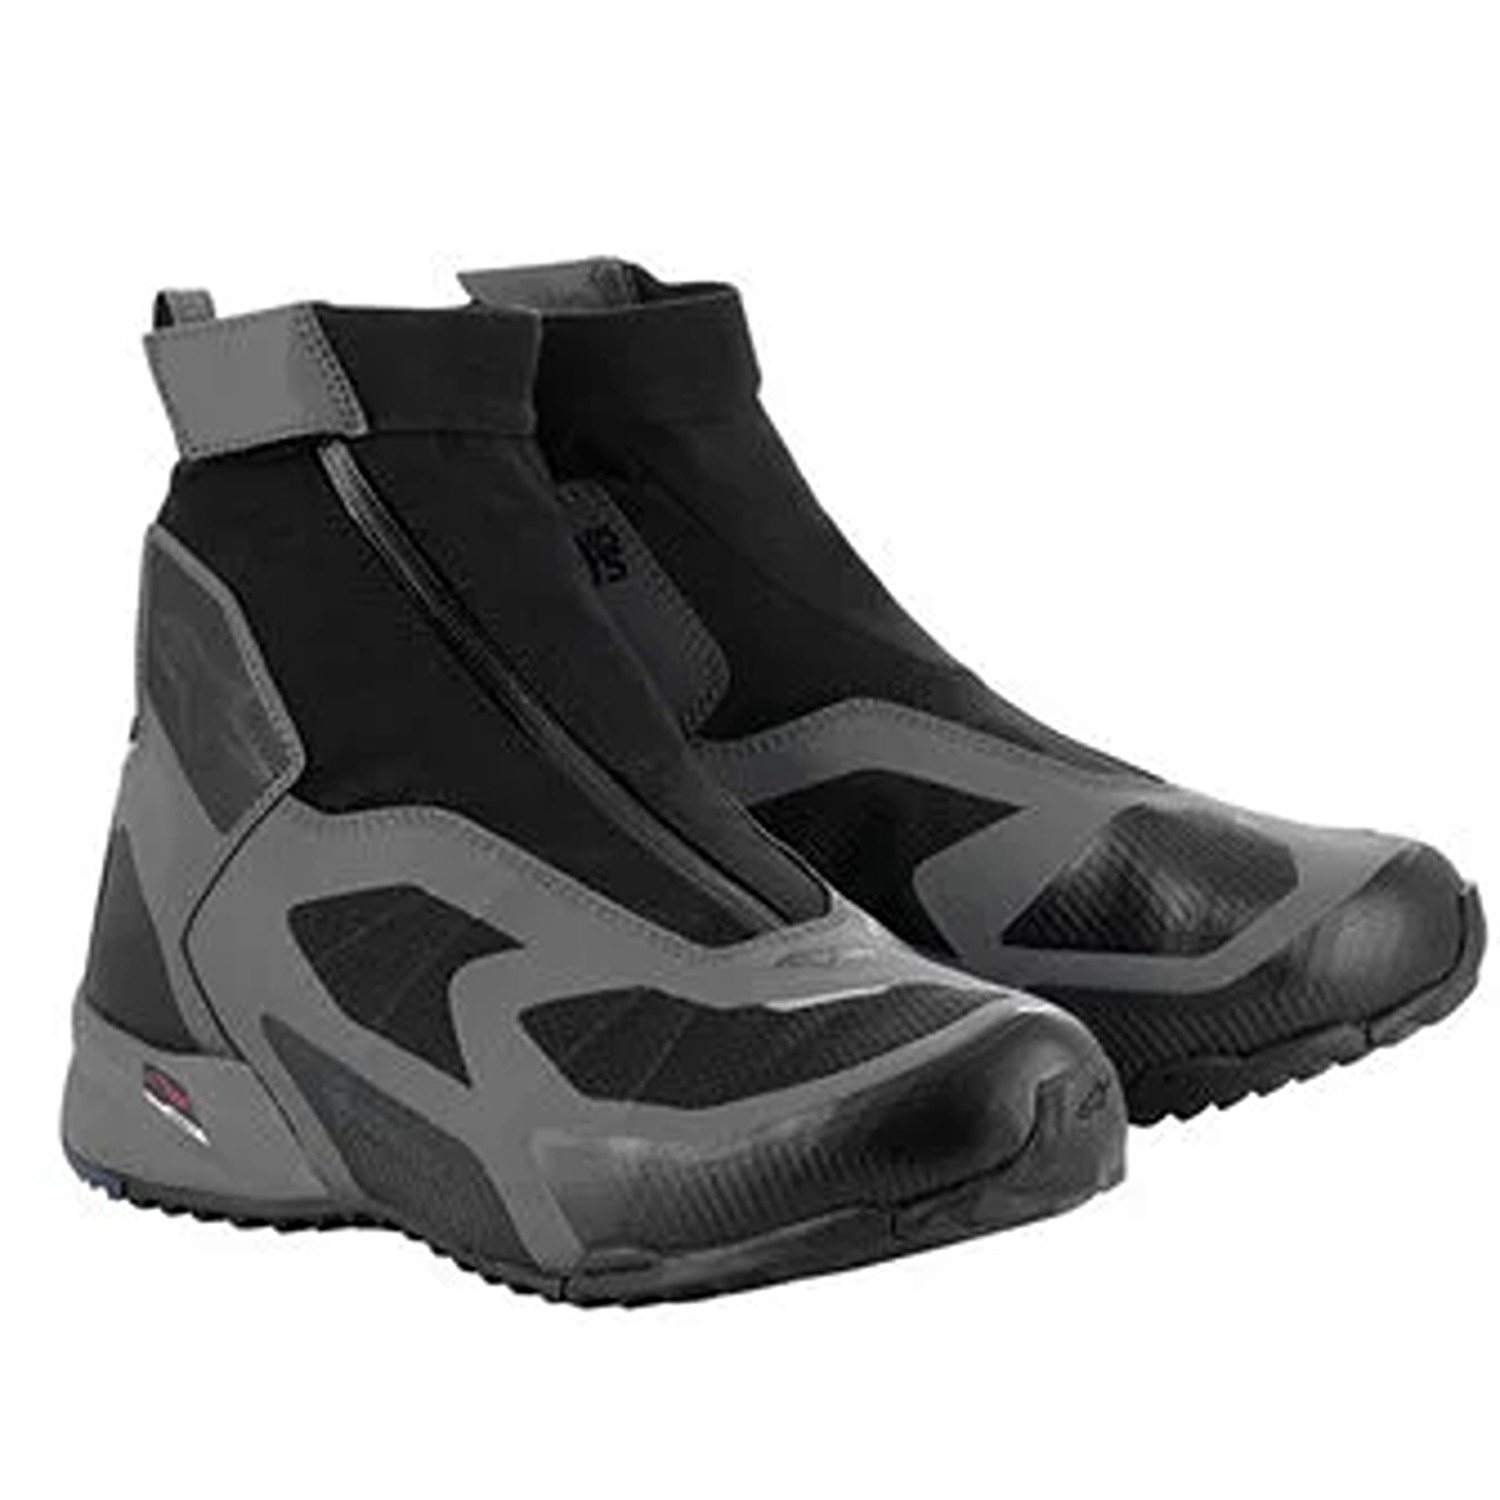 Image of Alpinestars CR-8 Gore-Tex Shoes Black Mid Gray Bright Red Size US 14 EN